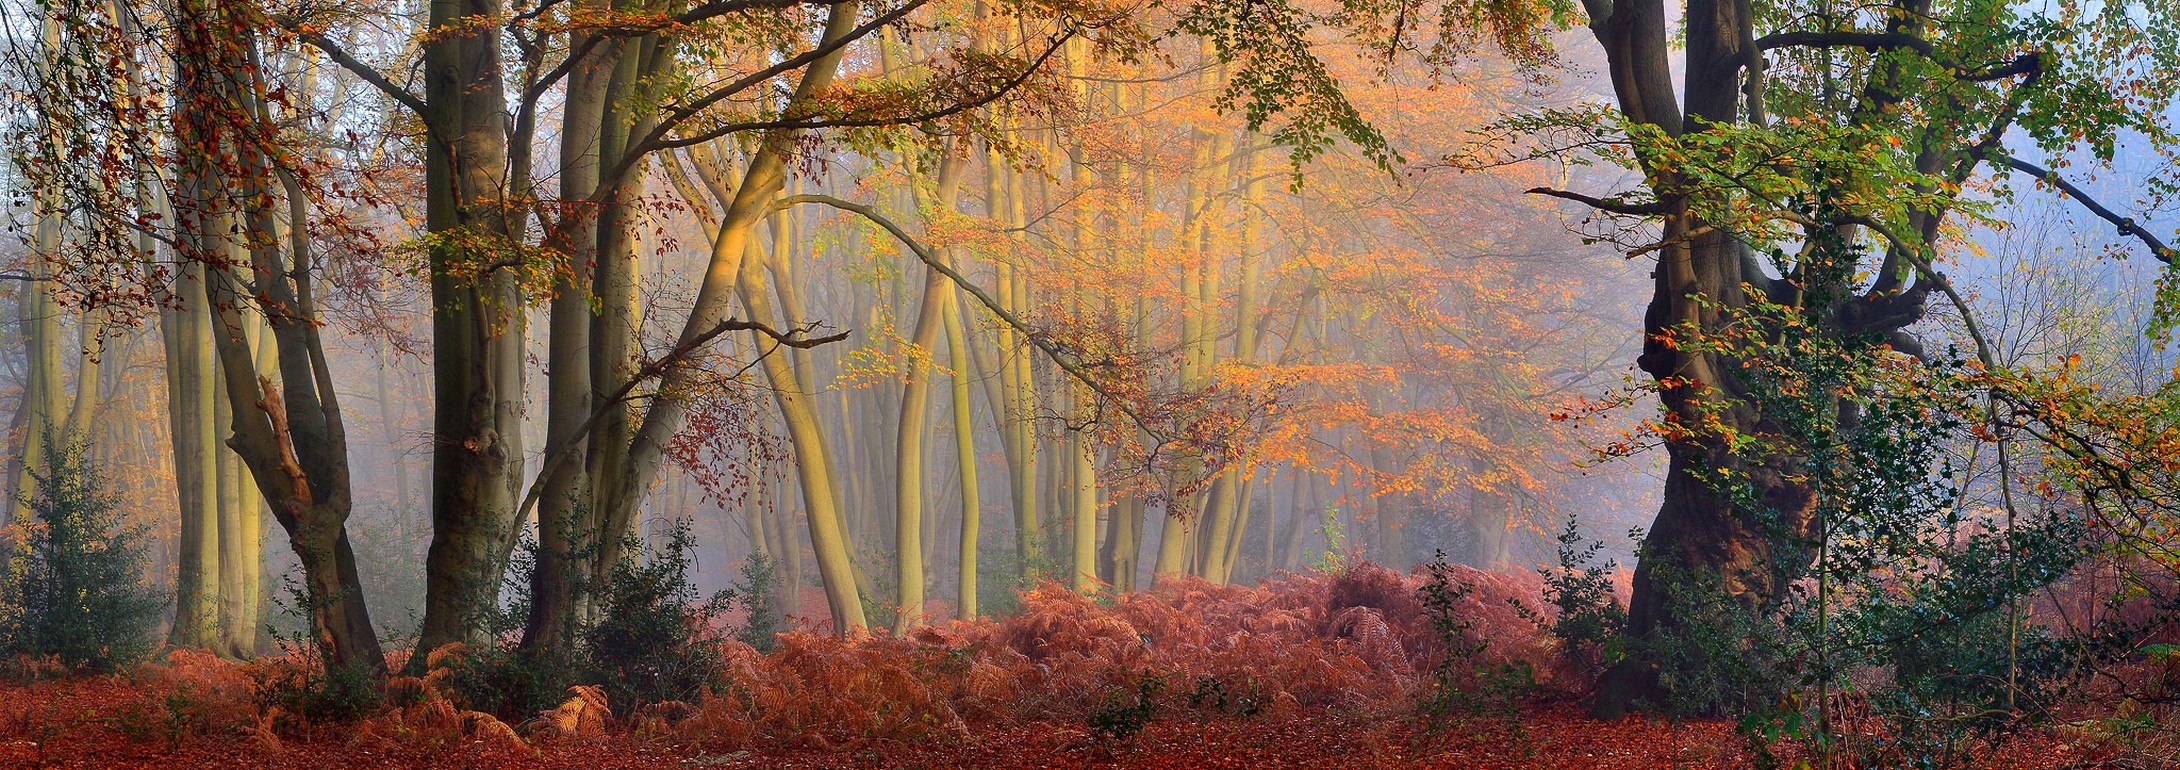 General 2180x770 mist forest fall trees sun rays morning shrubs panorama nature landscape